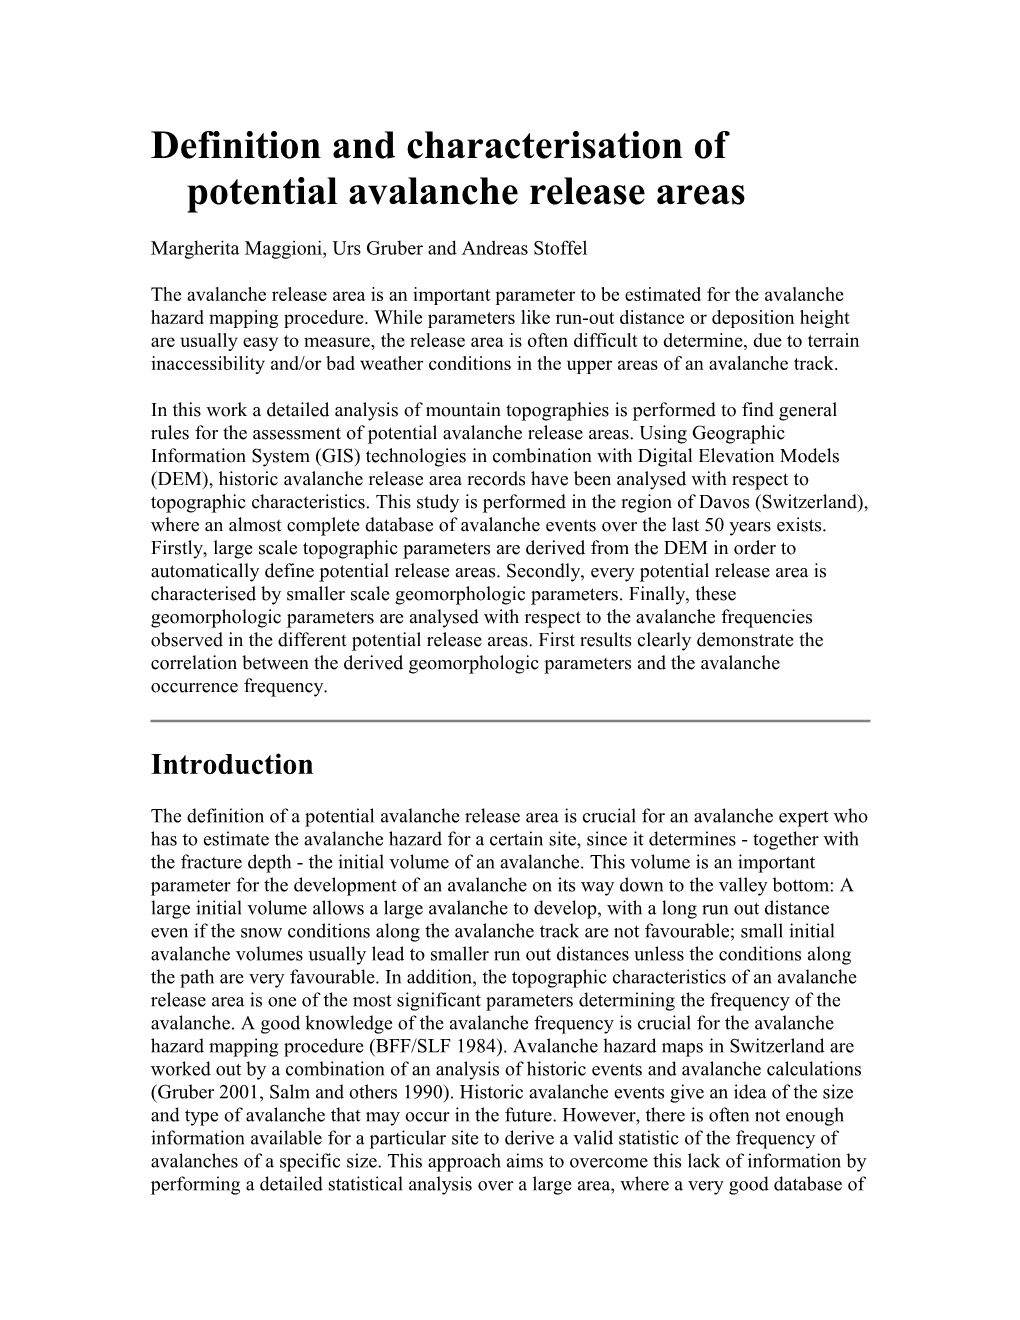 Definition and Characterisation of Potential Avalanche Release Areas